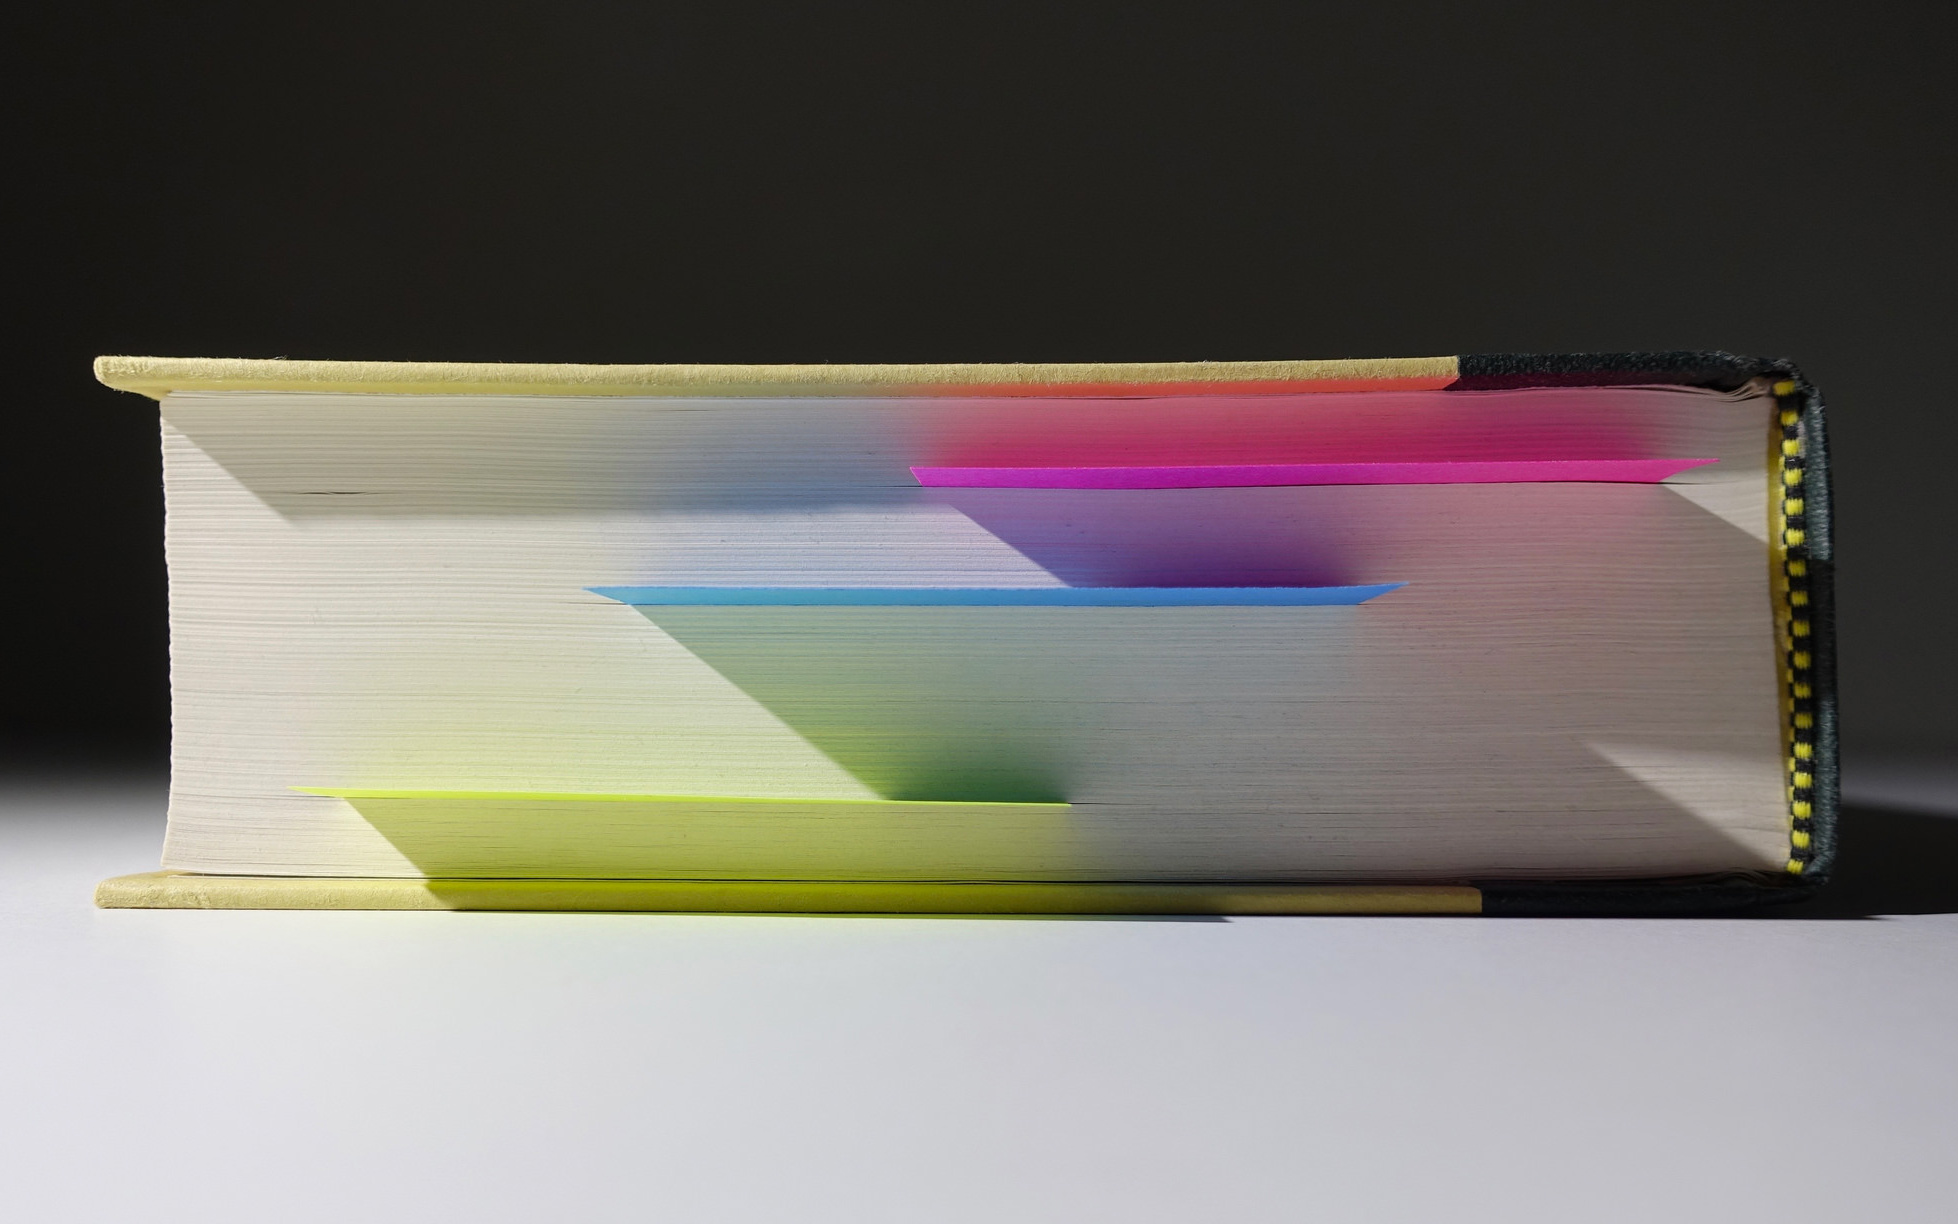 Image: A book with post-it notes marking pages.